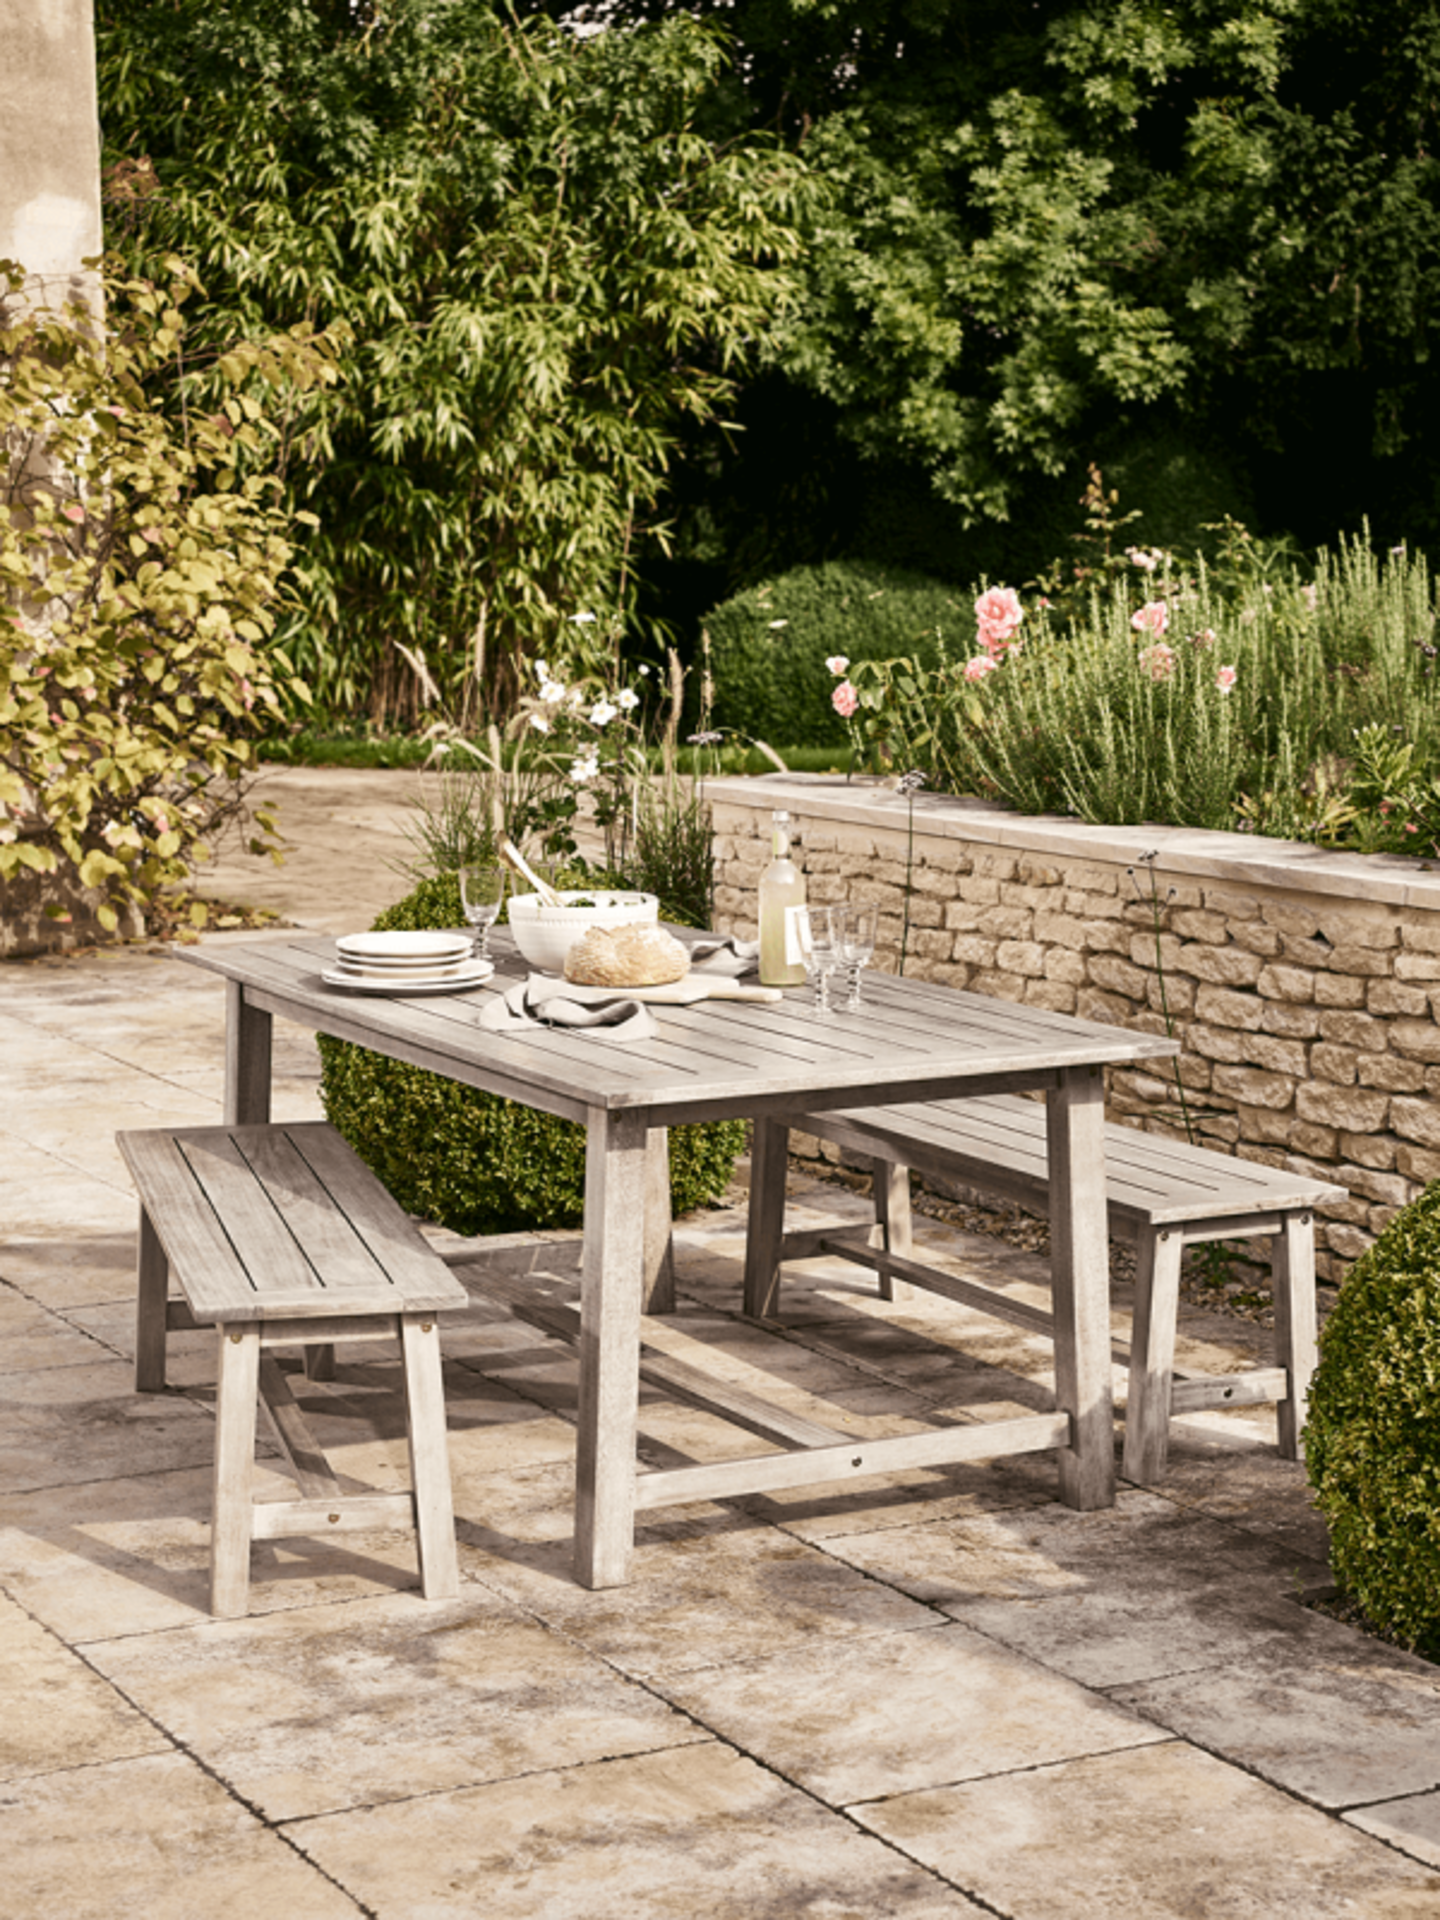 | 1X | RAVELLO OUT DOOR DINING SET INCLUDES TABLE AND 2 BENCHES | UNCHECKED FOR COMPLETENESS AND